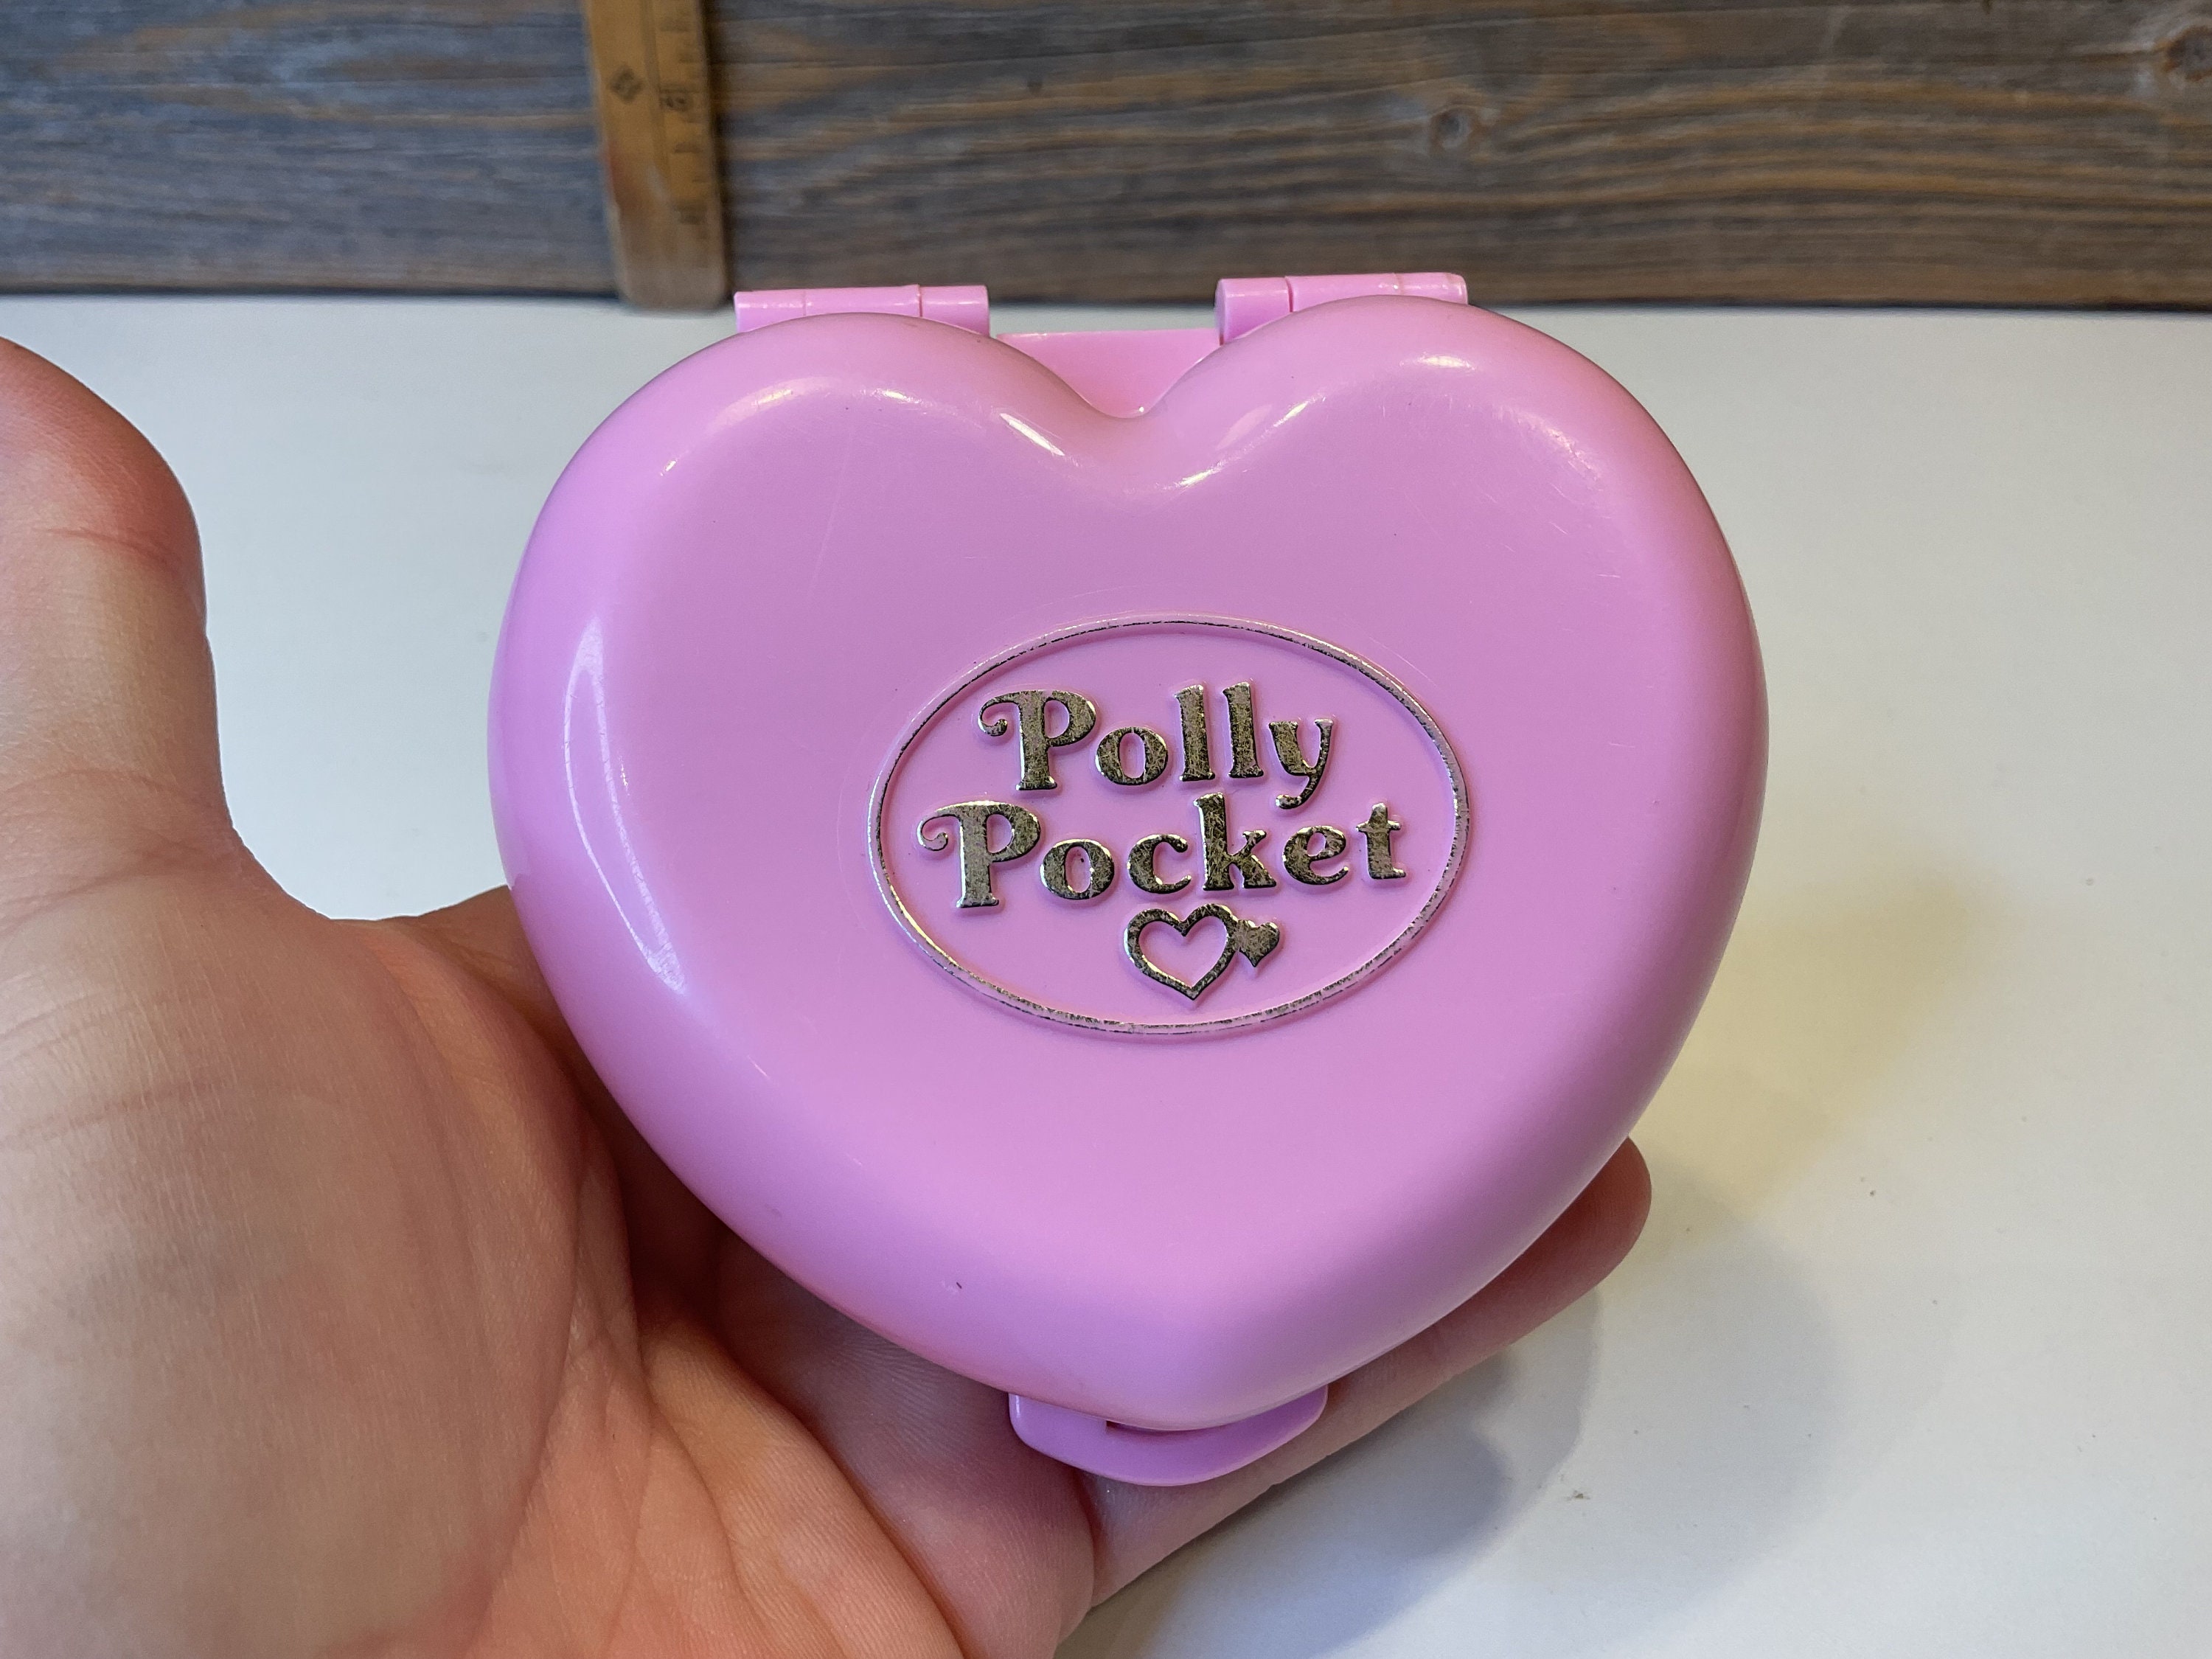 Vintage Bluebird Polly Pocket Compact Purple Suitcase and Pink Heart 